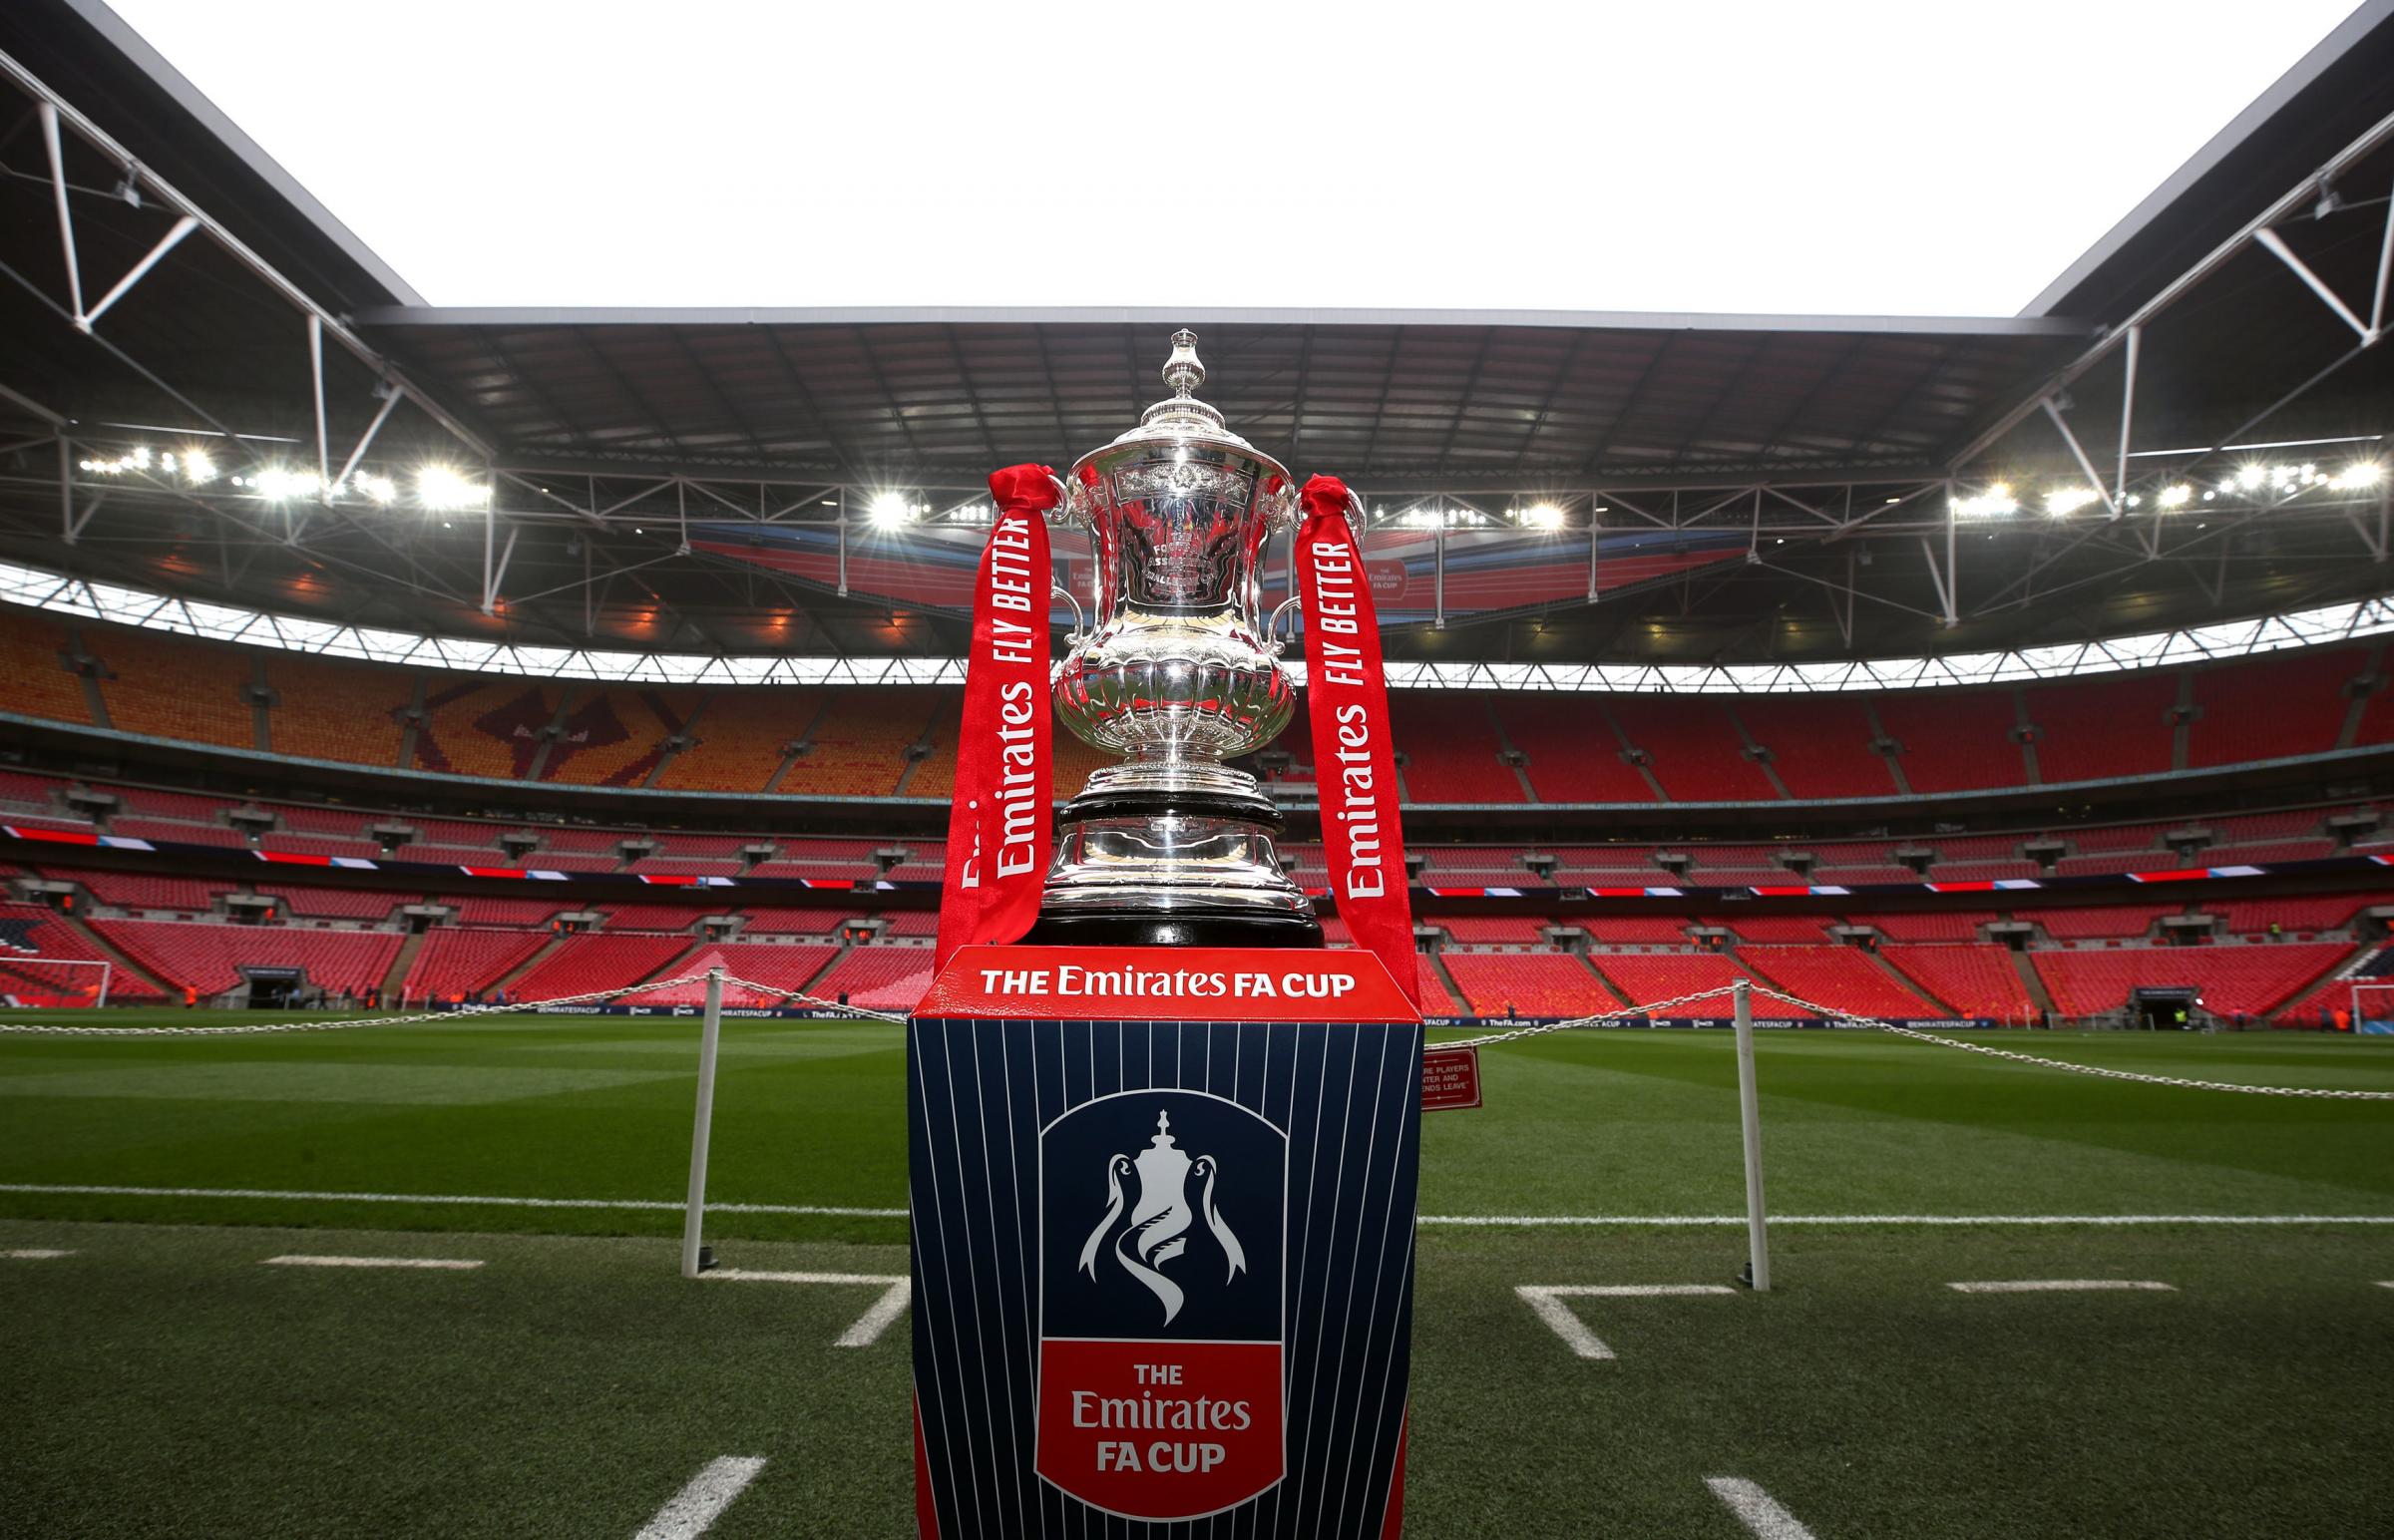 What number are Albion and Crawley in the FA Cup Fourth round draw?